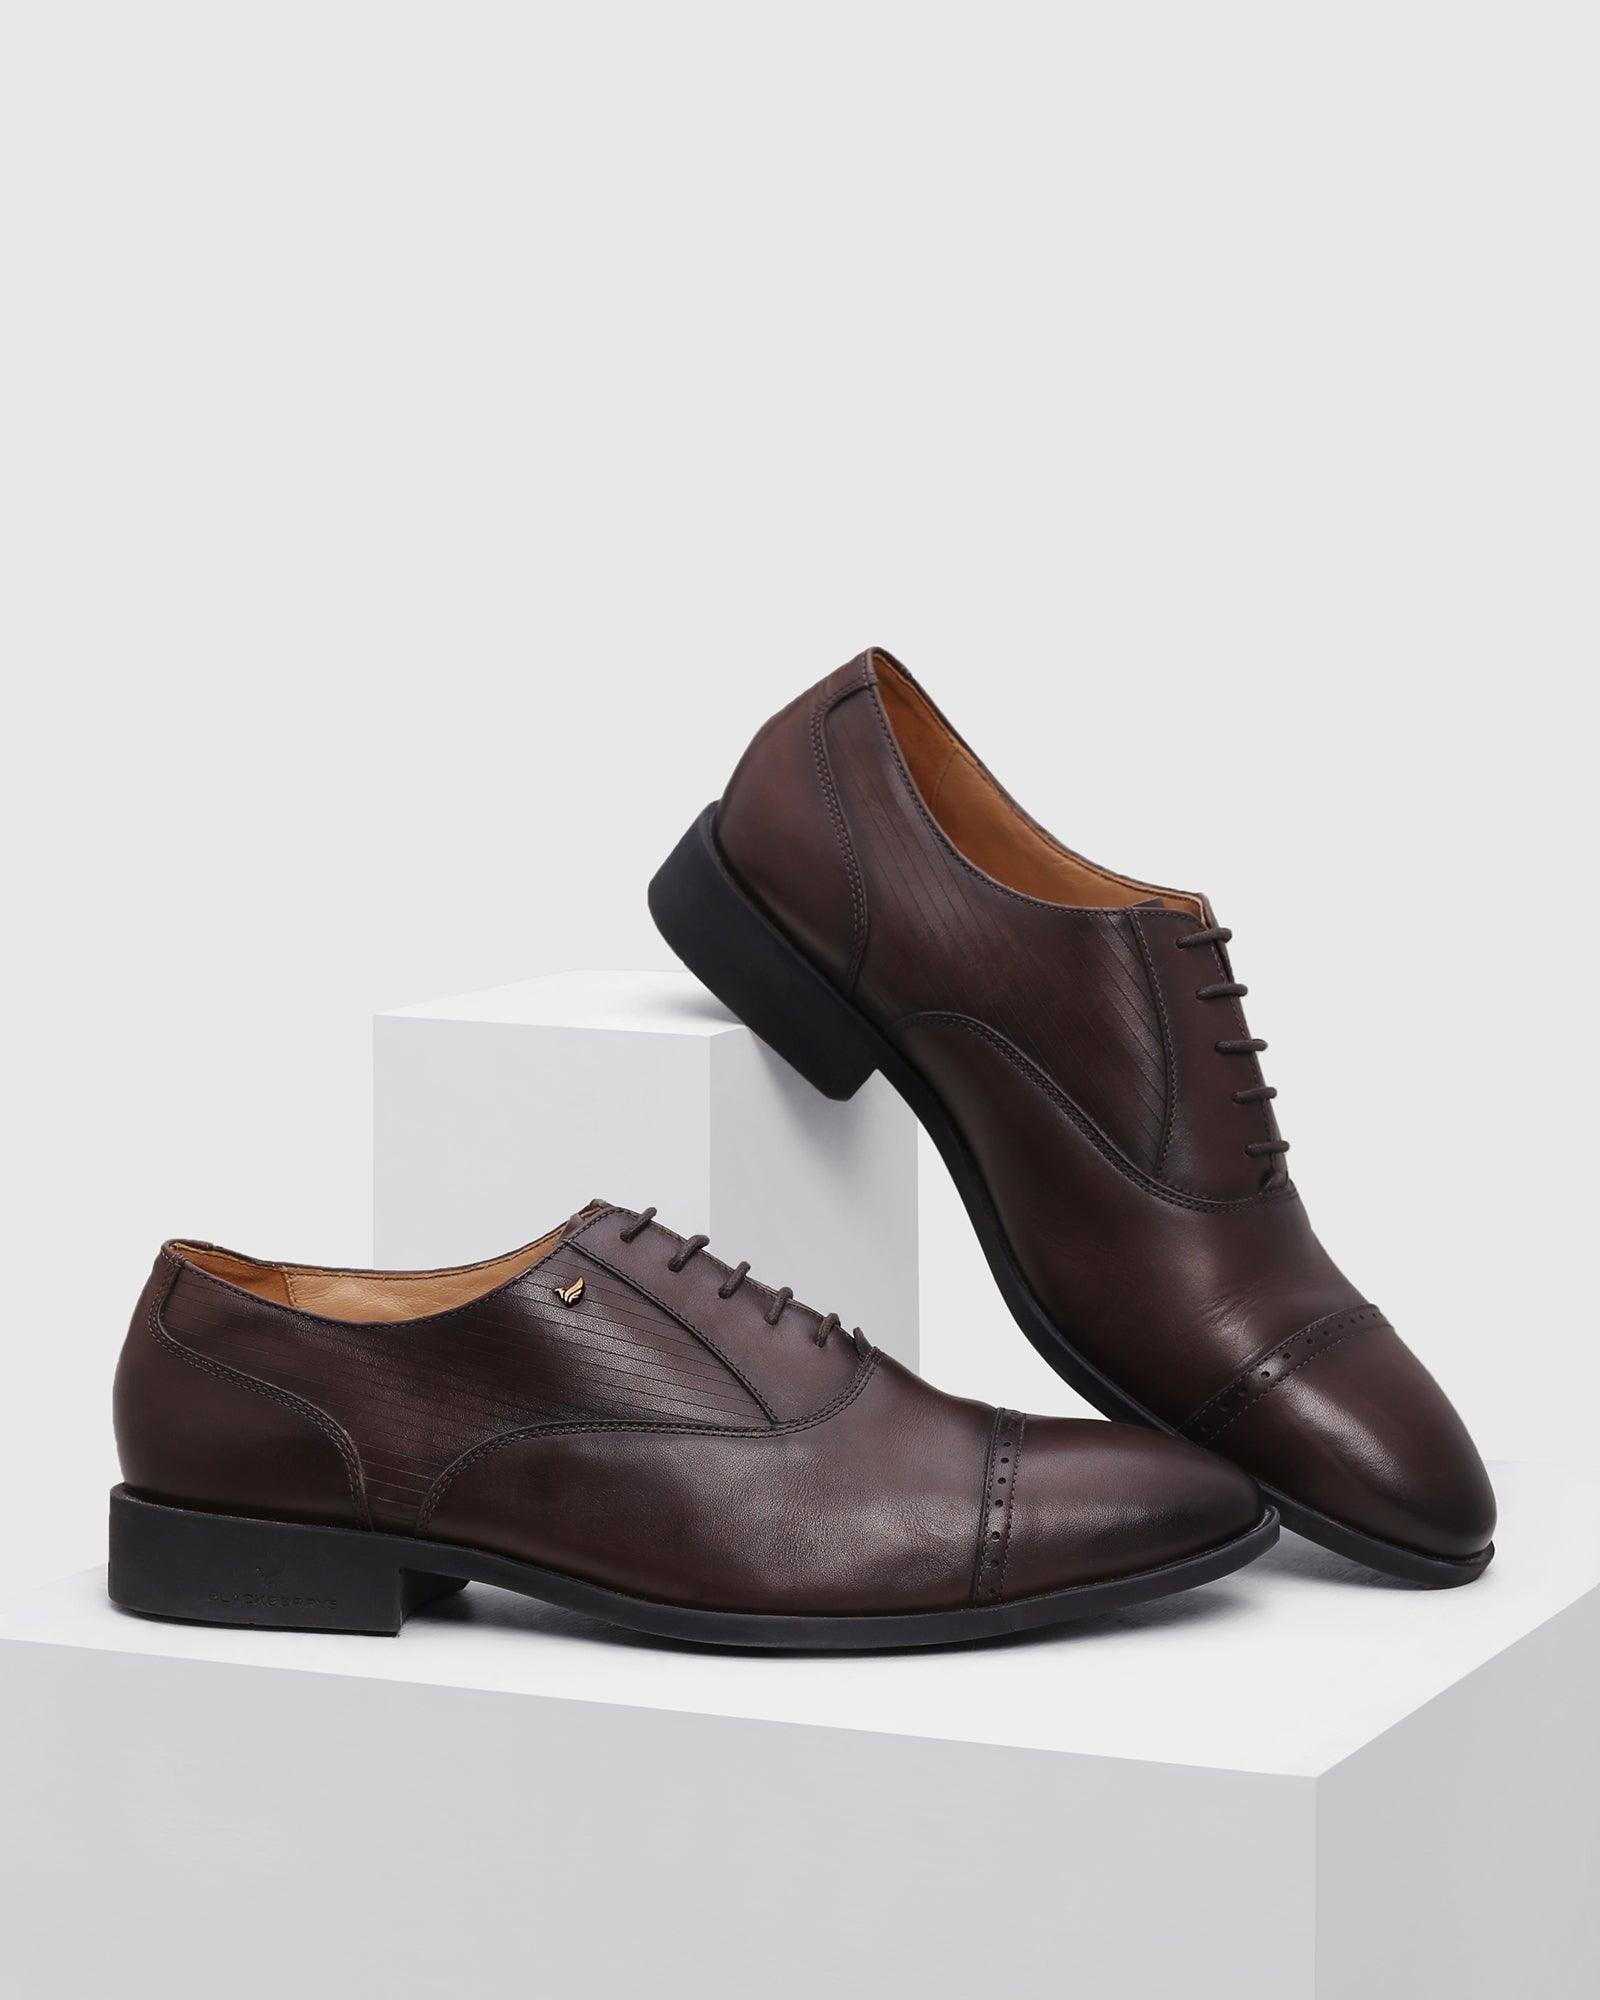 Leather Formal Brown Solid Oxford Shoes - Prebolt